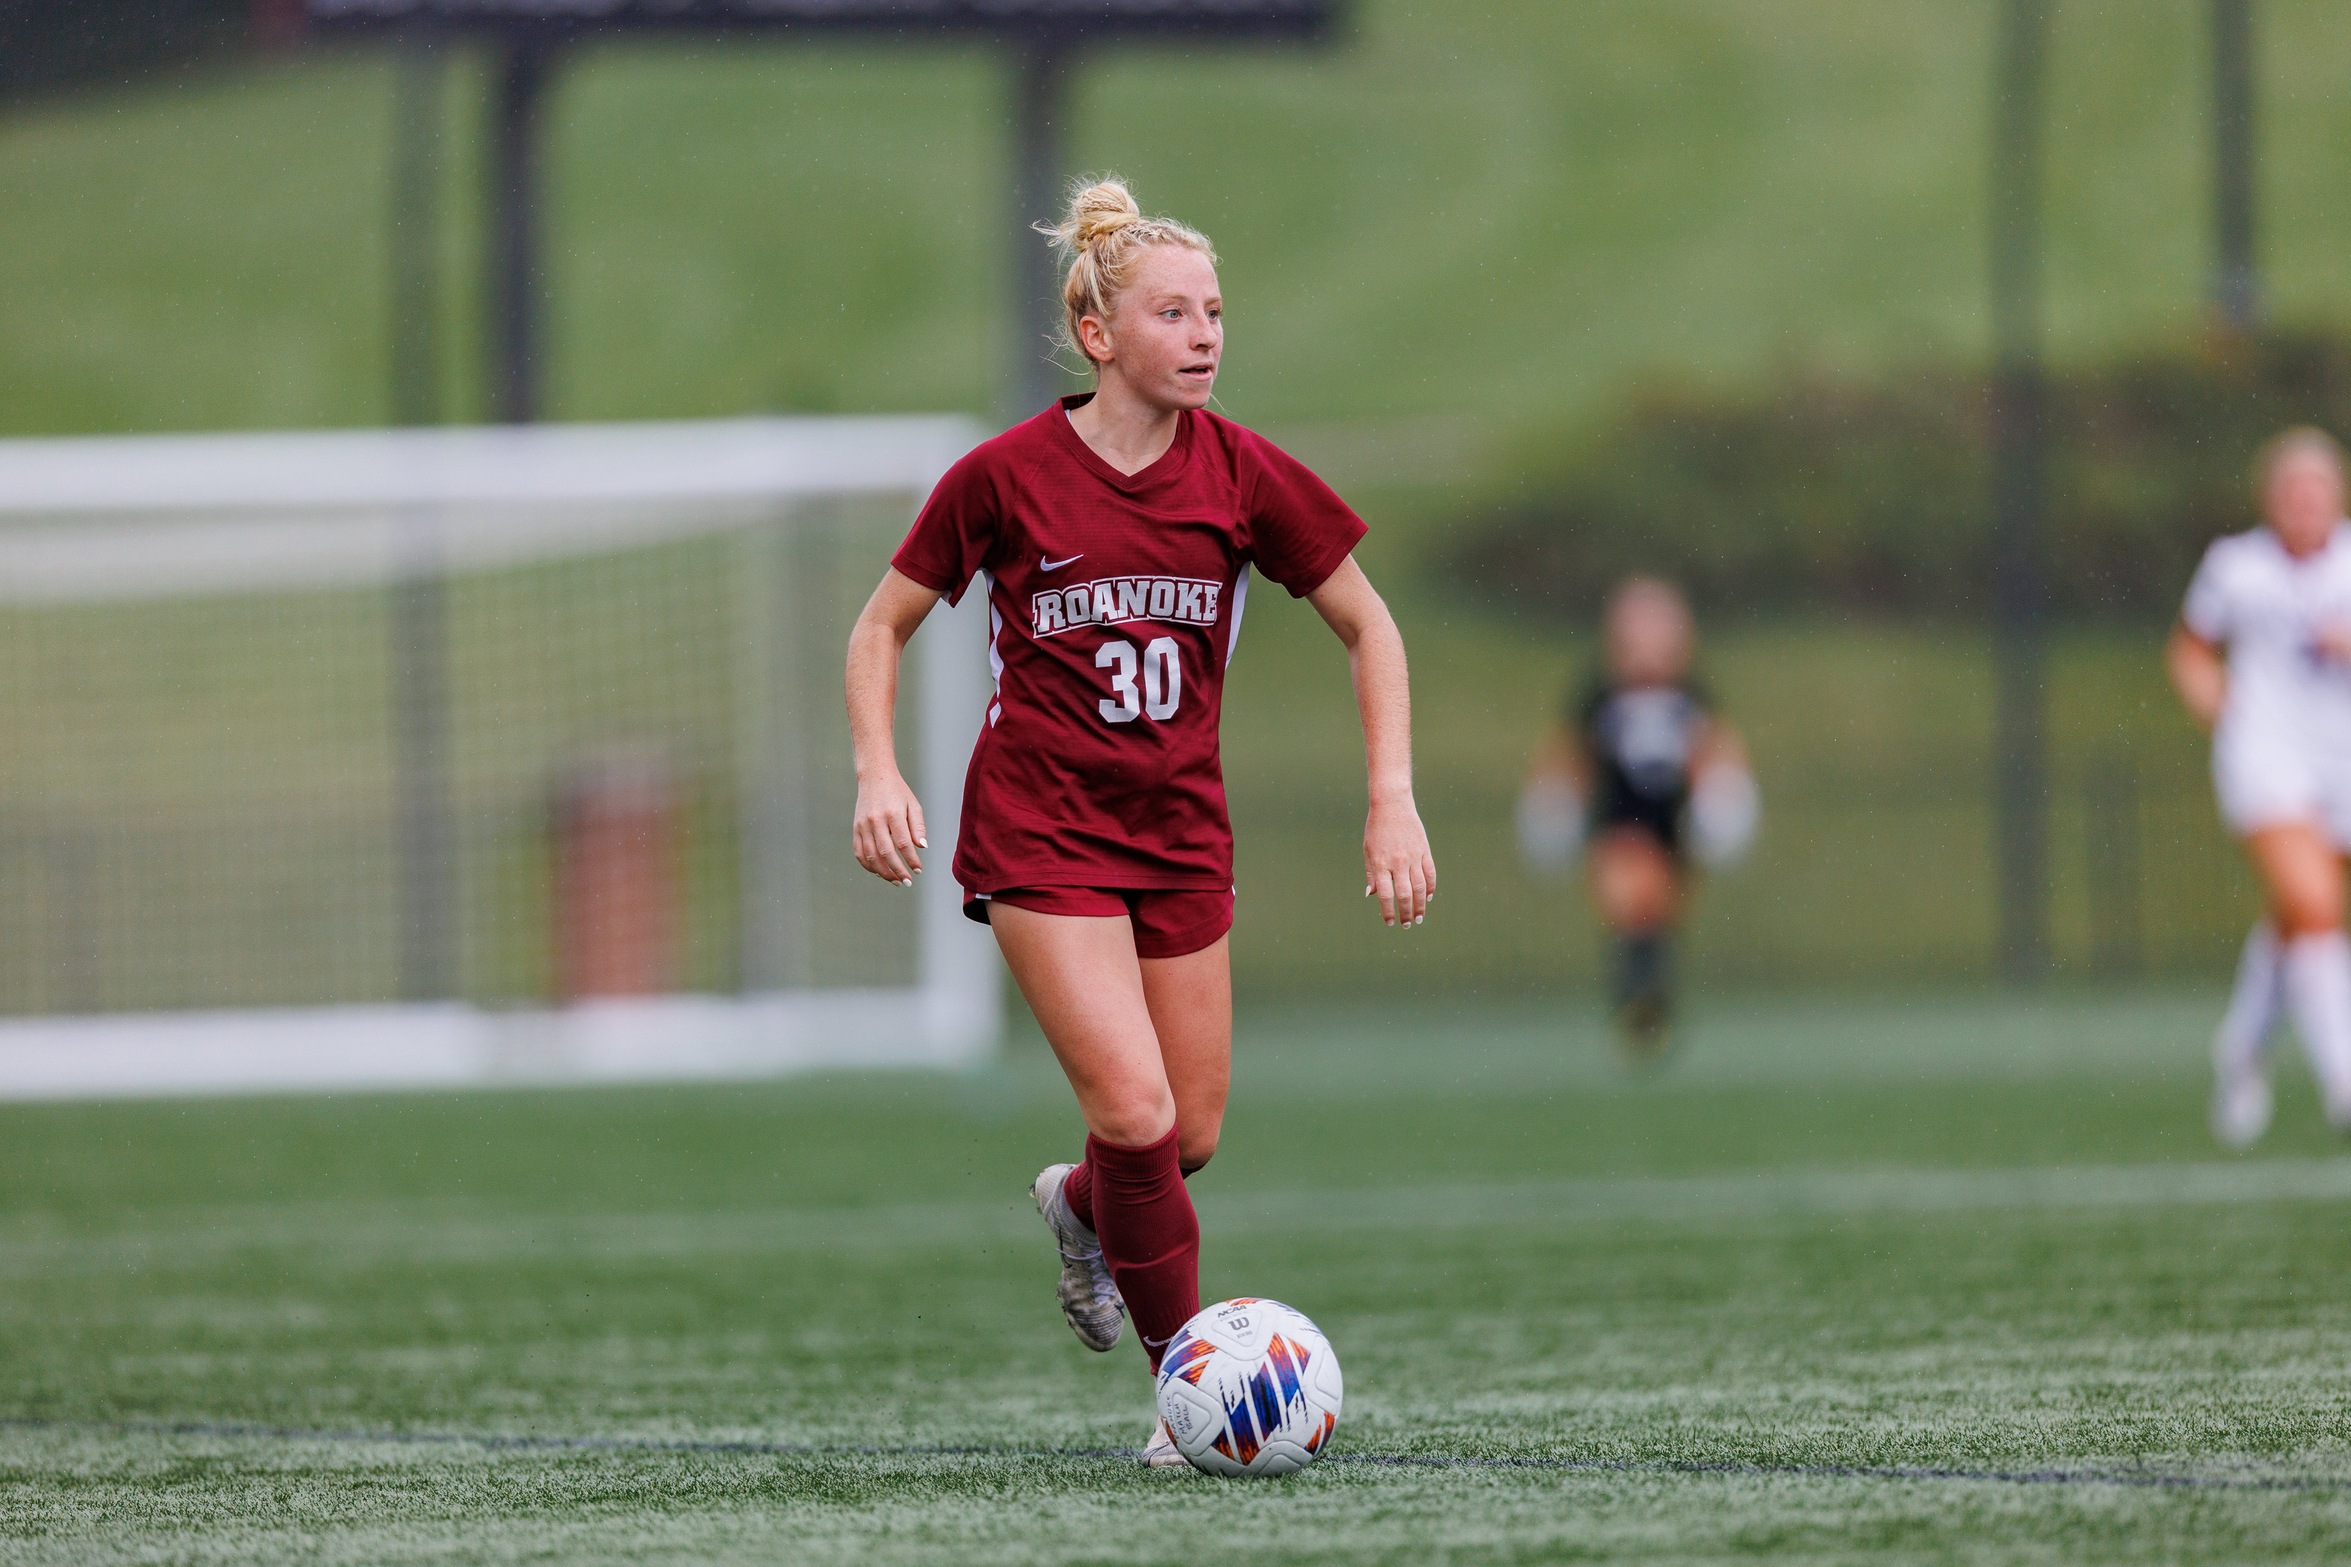 Maroons Down Pfeiffer in a 5-0 Shutout on the Road